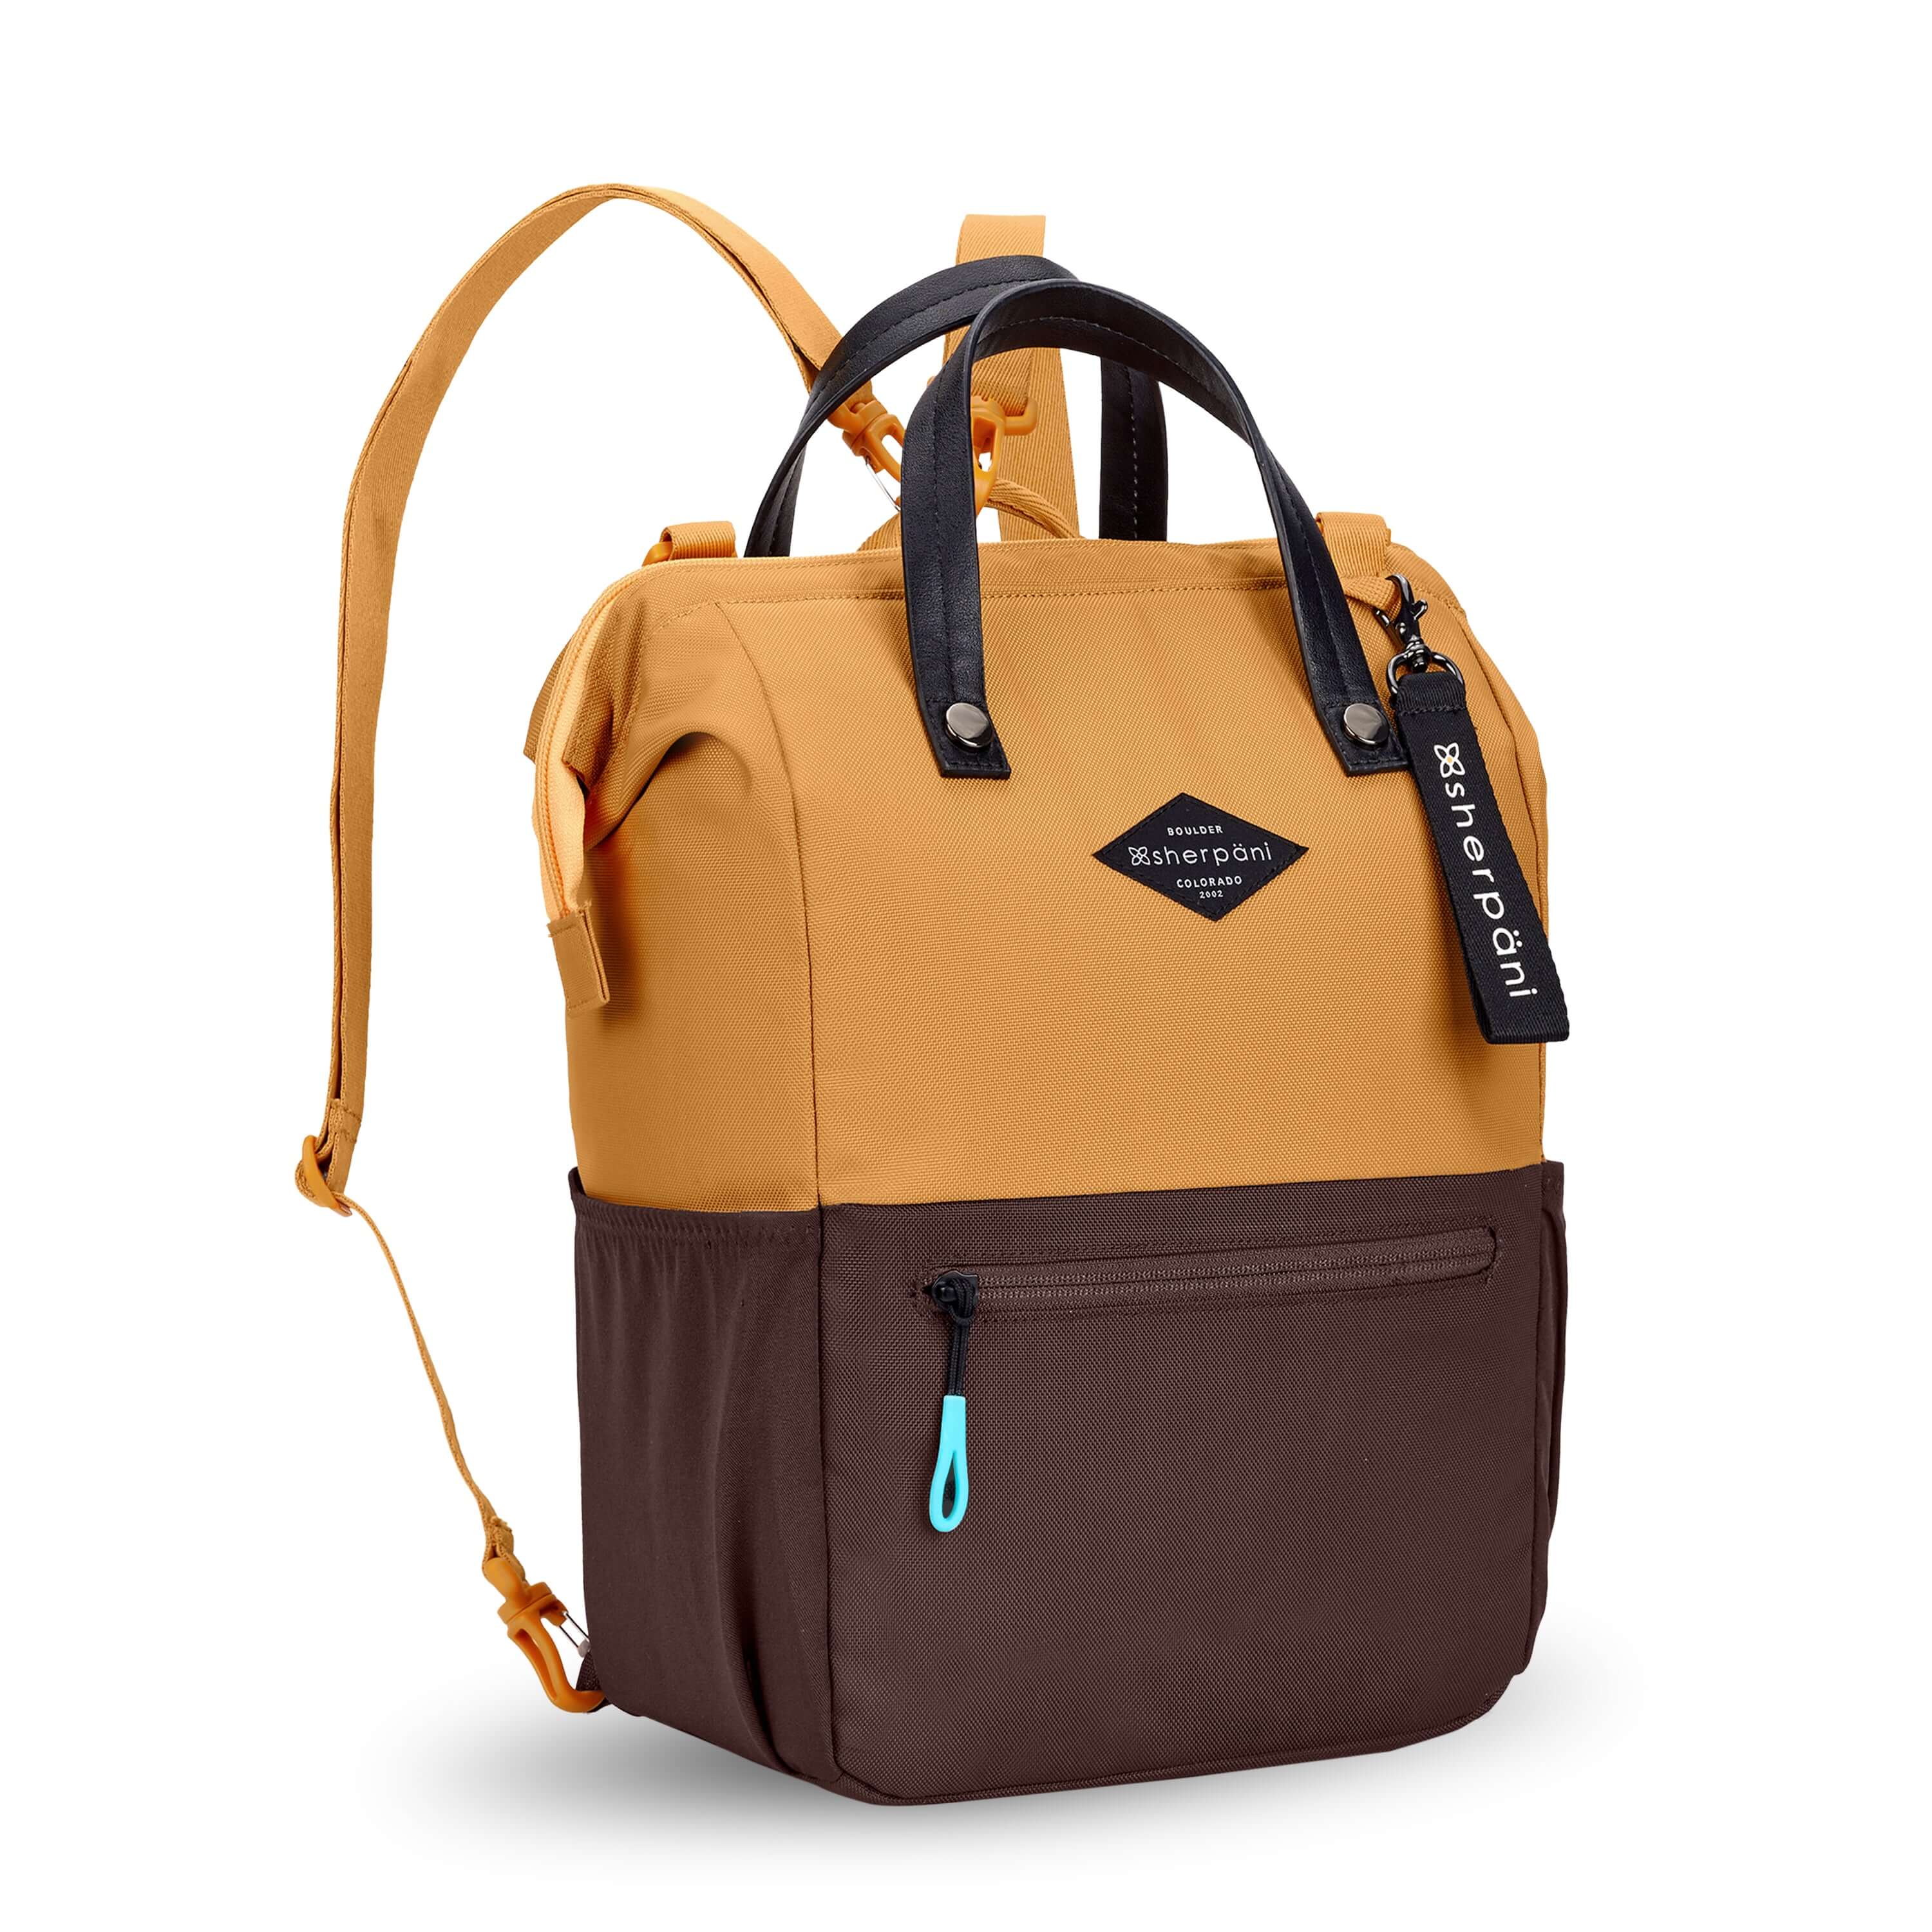 Angled front view of Sherpani three-in-one bag, the Dispatch in Sundial. The bag is two-toned: the top is burnt yellow and the bottom is brown. There is an external zipper pocket on the front panel. Easy-pull zippers are accented in aqua. A branded Sherpani keychain is clipped to the upper right corner. Elastic water bottle holders sit on either side of the bag. It has short tote handles and adjustable/detachable straps that can function for a backpack or crossbody. 